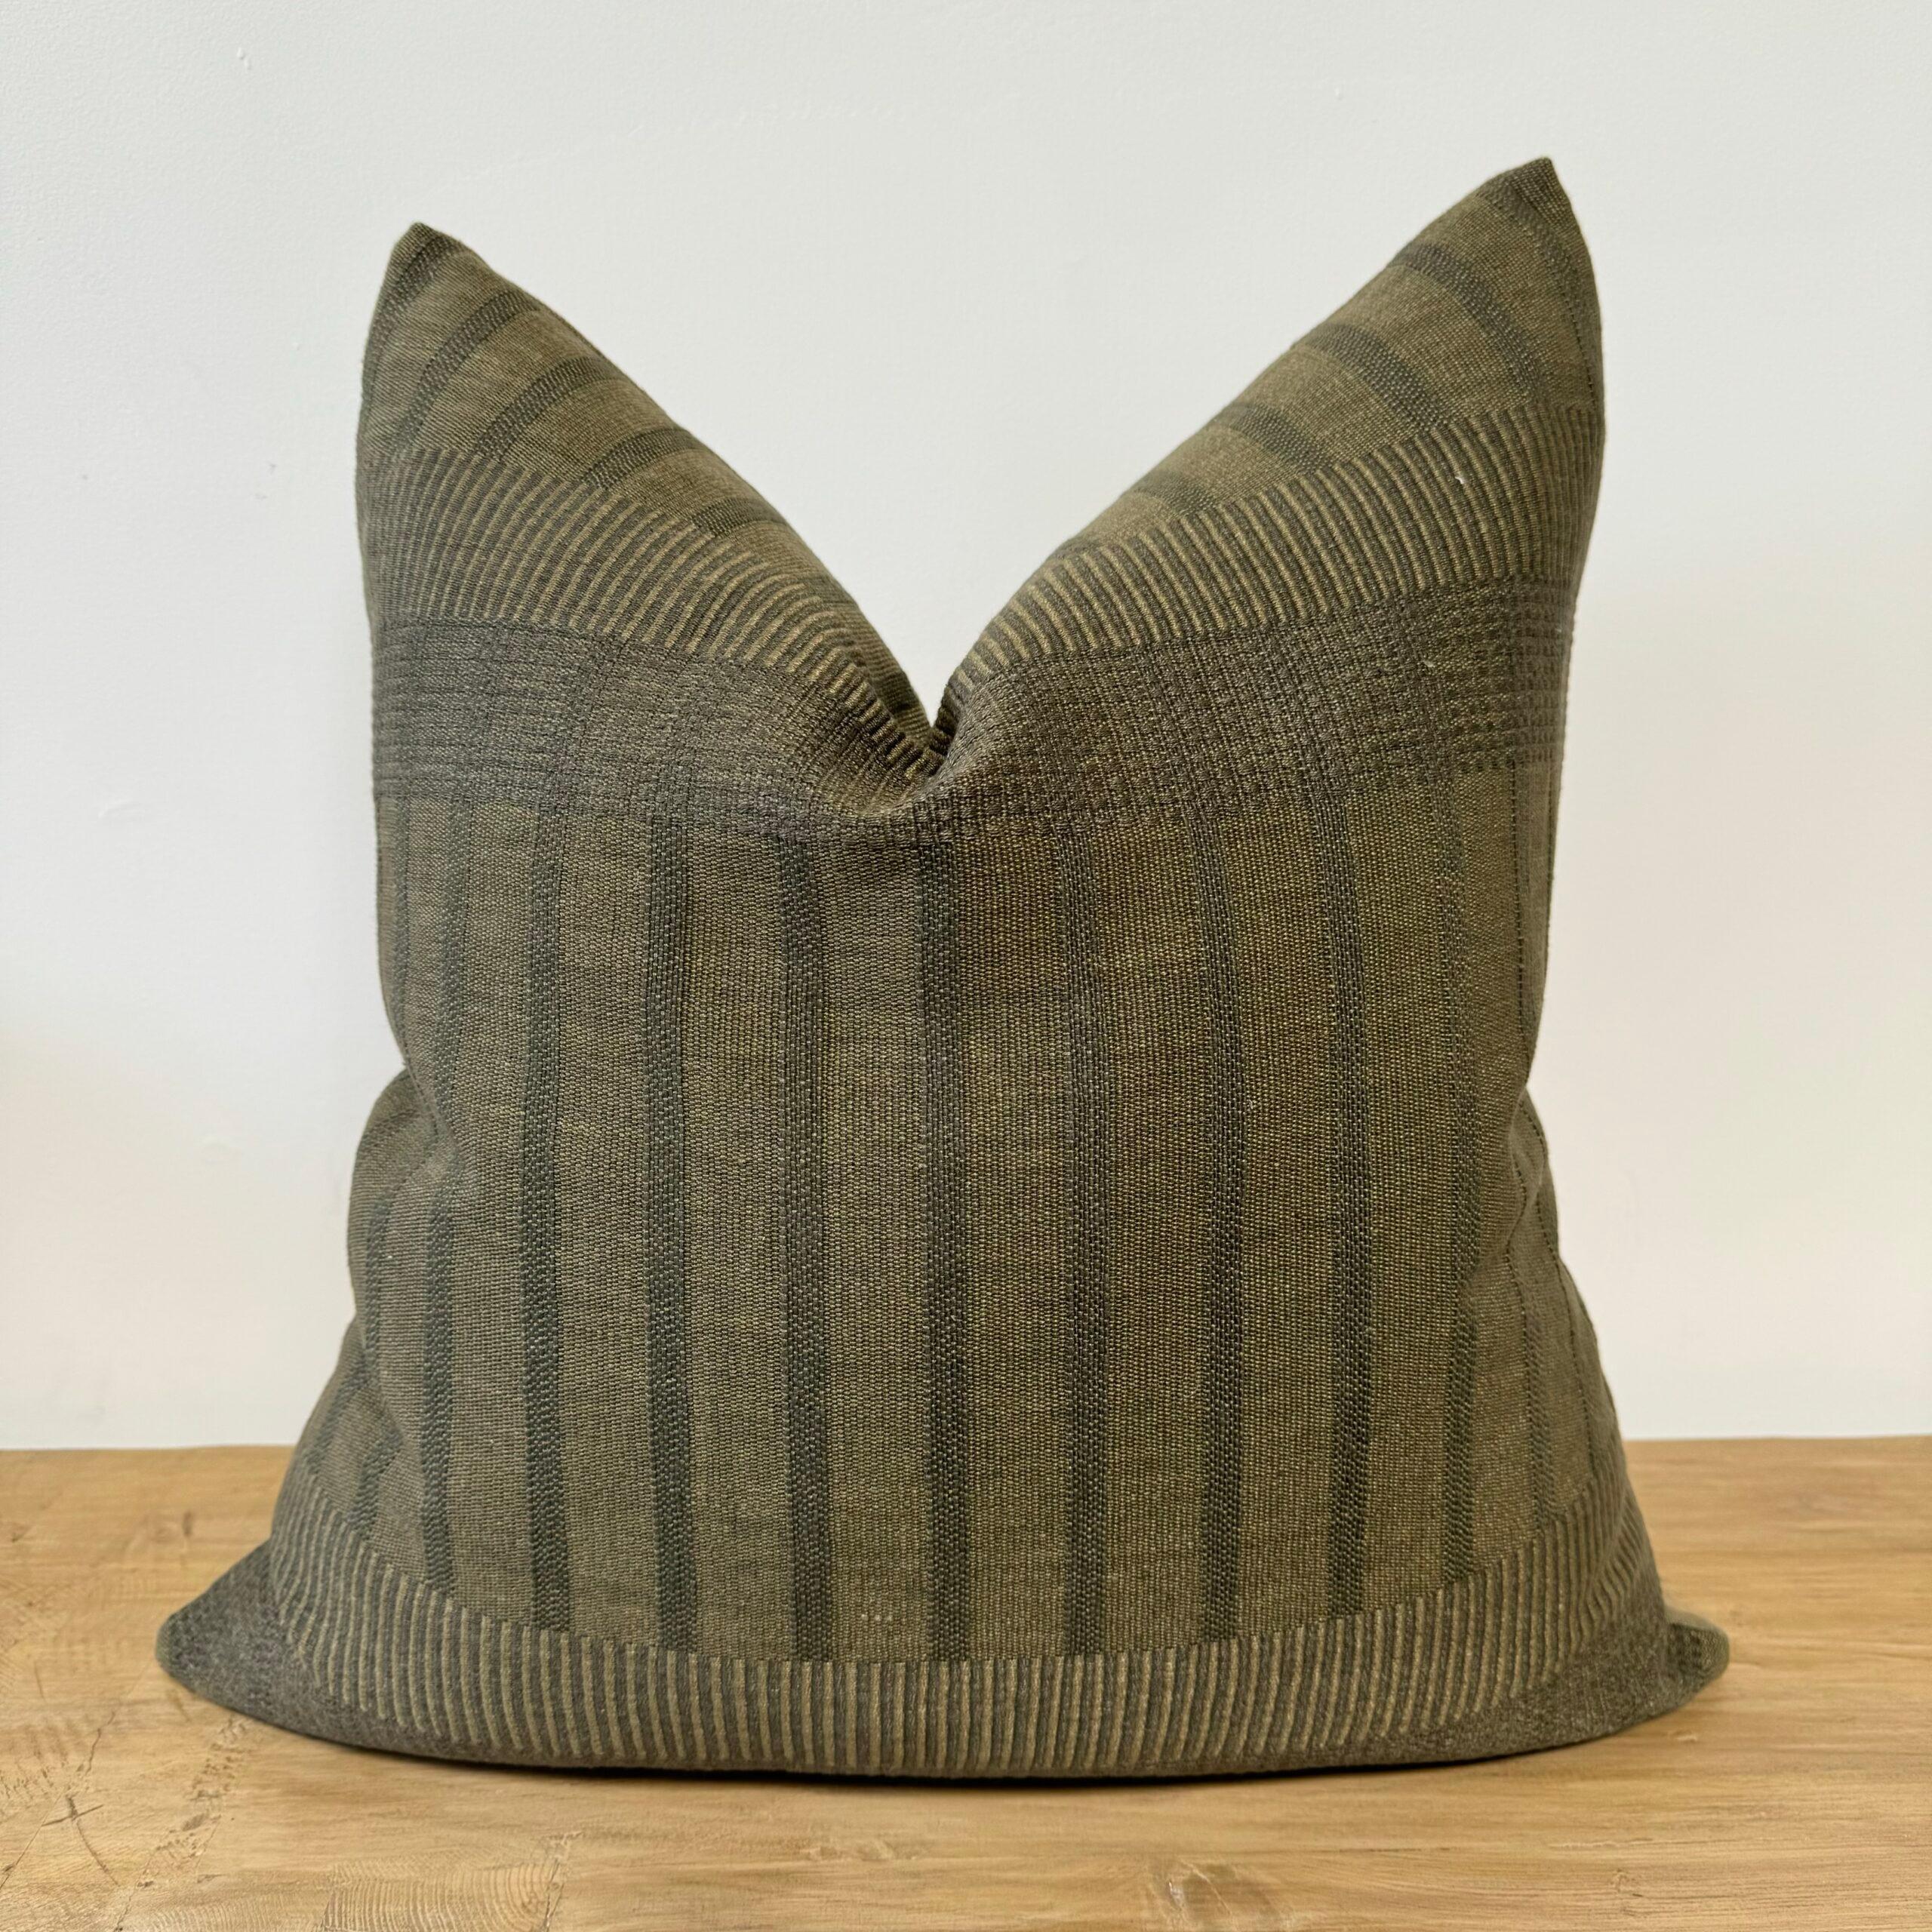 ZAK + FOX linen cotton blend Vagabond in olive
Size: 22x22
Antique brass zipper closure
overlocked stitched edges
color: olive green
This is a handcrafted textile. Minor irregularities are inherent to the weave and are a hallmark of its